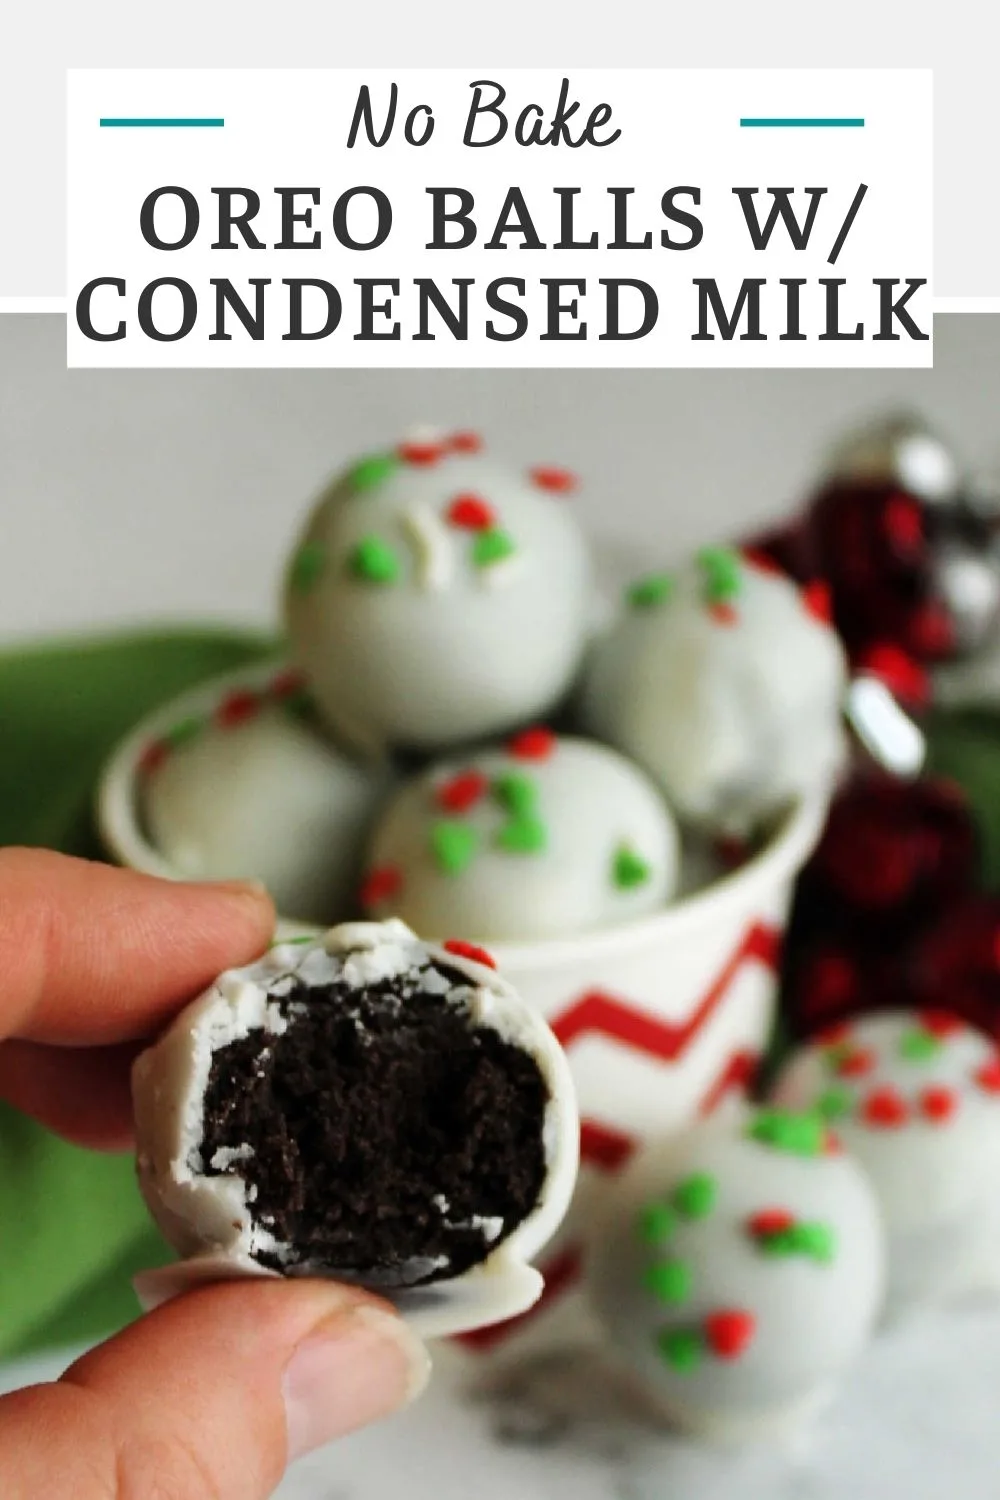 These Oreo balls are made with sweetened condensed milk instead of cream cheese. The results are everything you would want for the to be. Make a batch this Christmas to see for yourself!